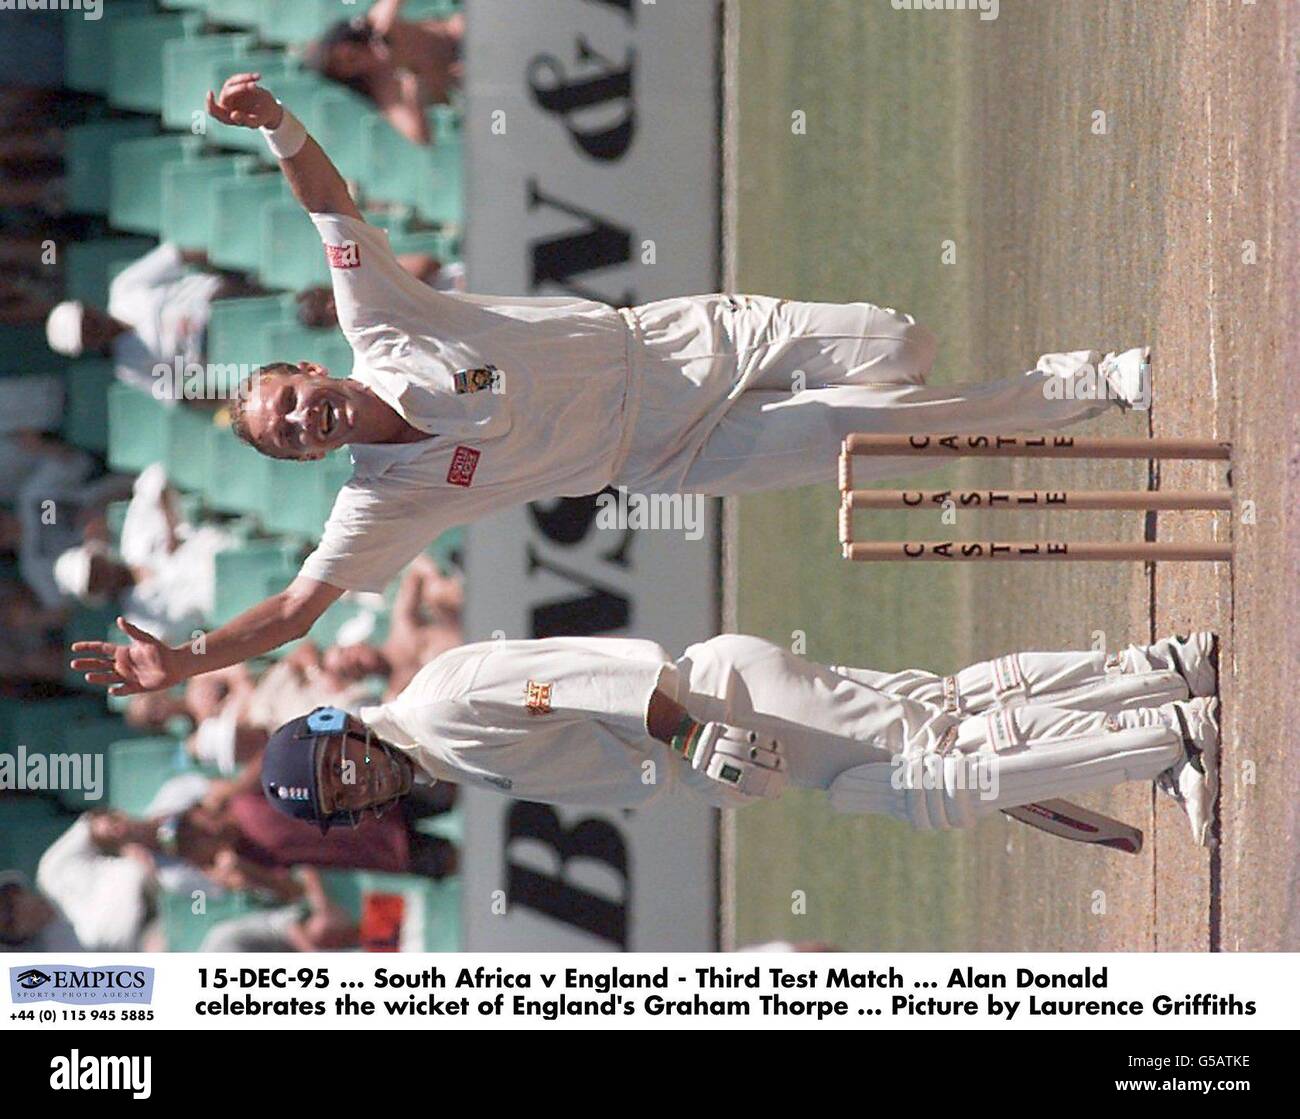 15-DEC-95. South Africa v England - Third Test Match. Allan Donald celebrates the wicket of England's Graham Thorpe. Picture by Laurence Griffiths Stock Photo